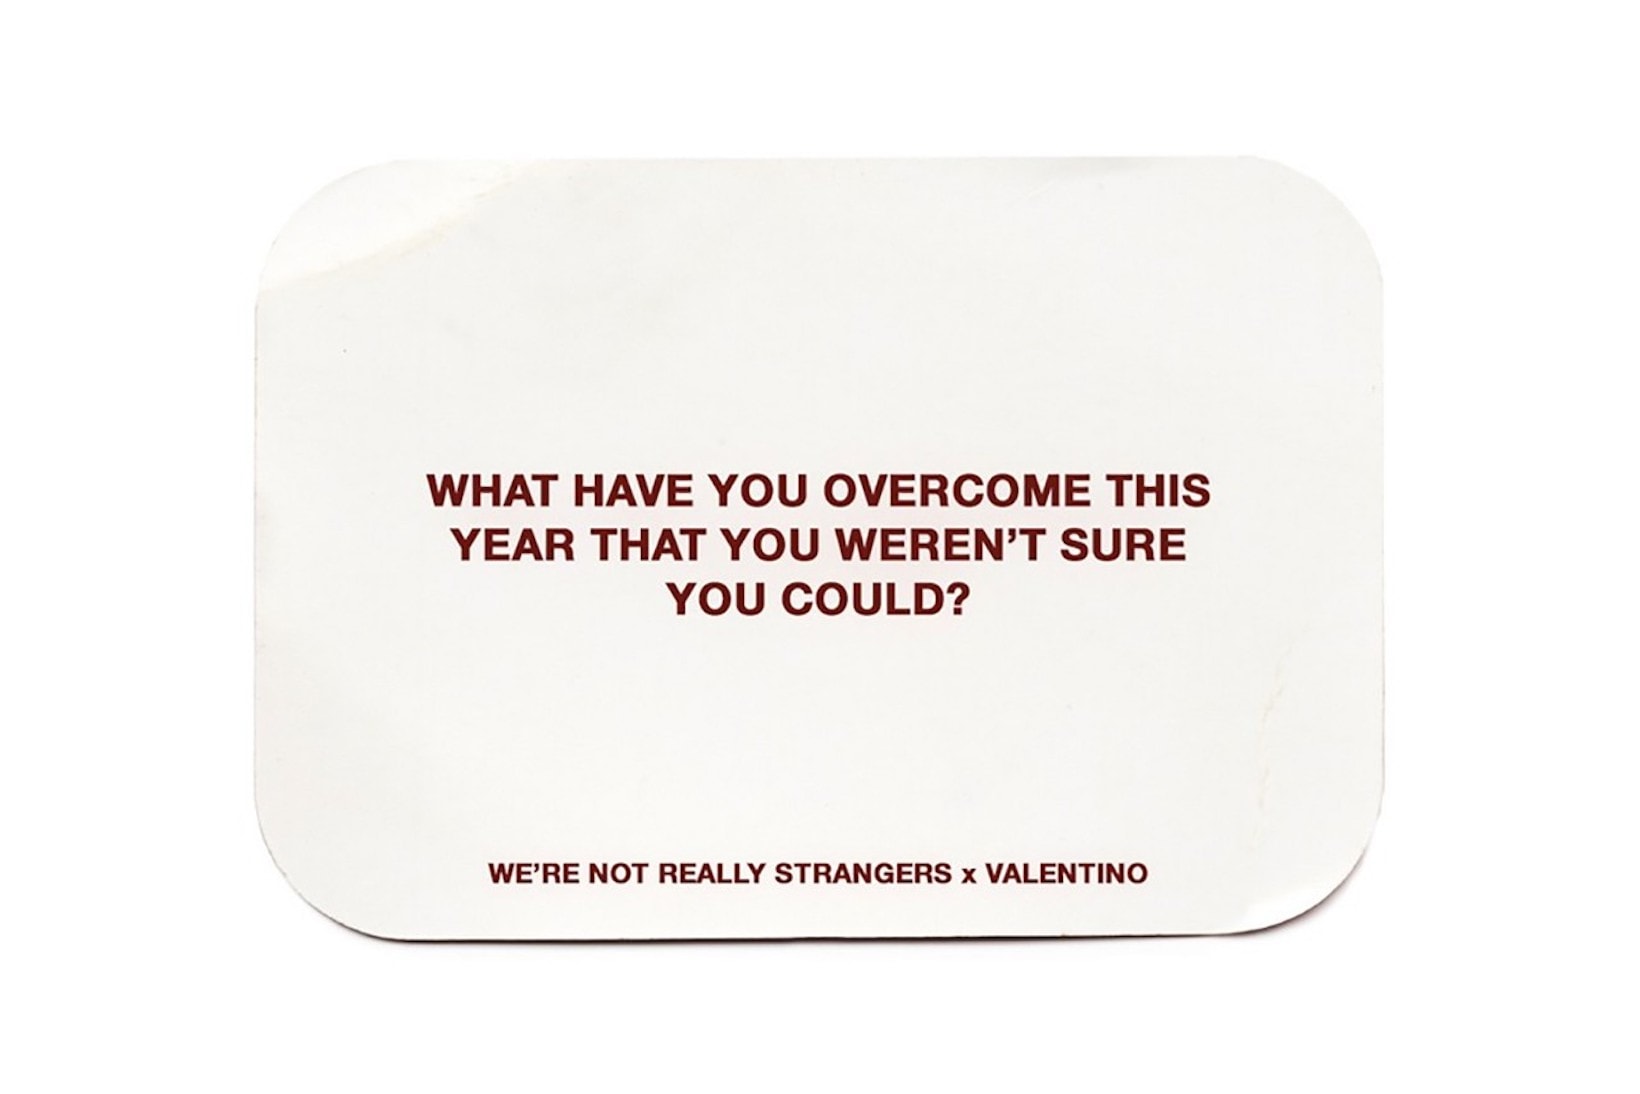 were not really strangers koreen valentino collaboration card game